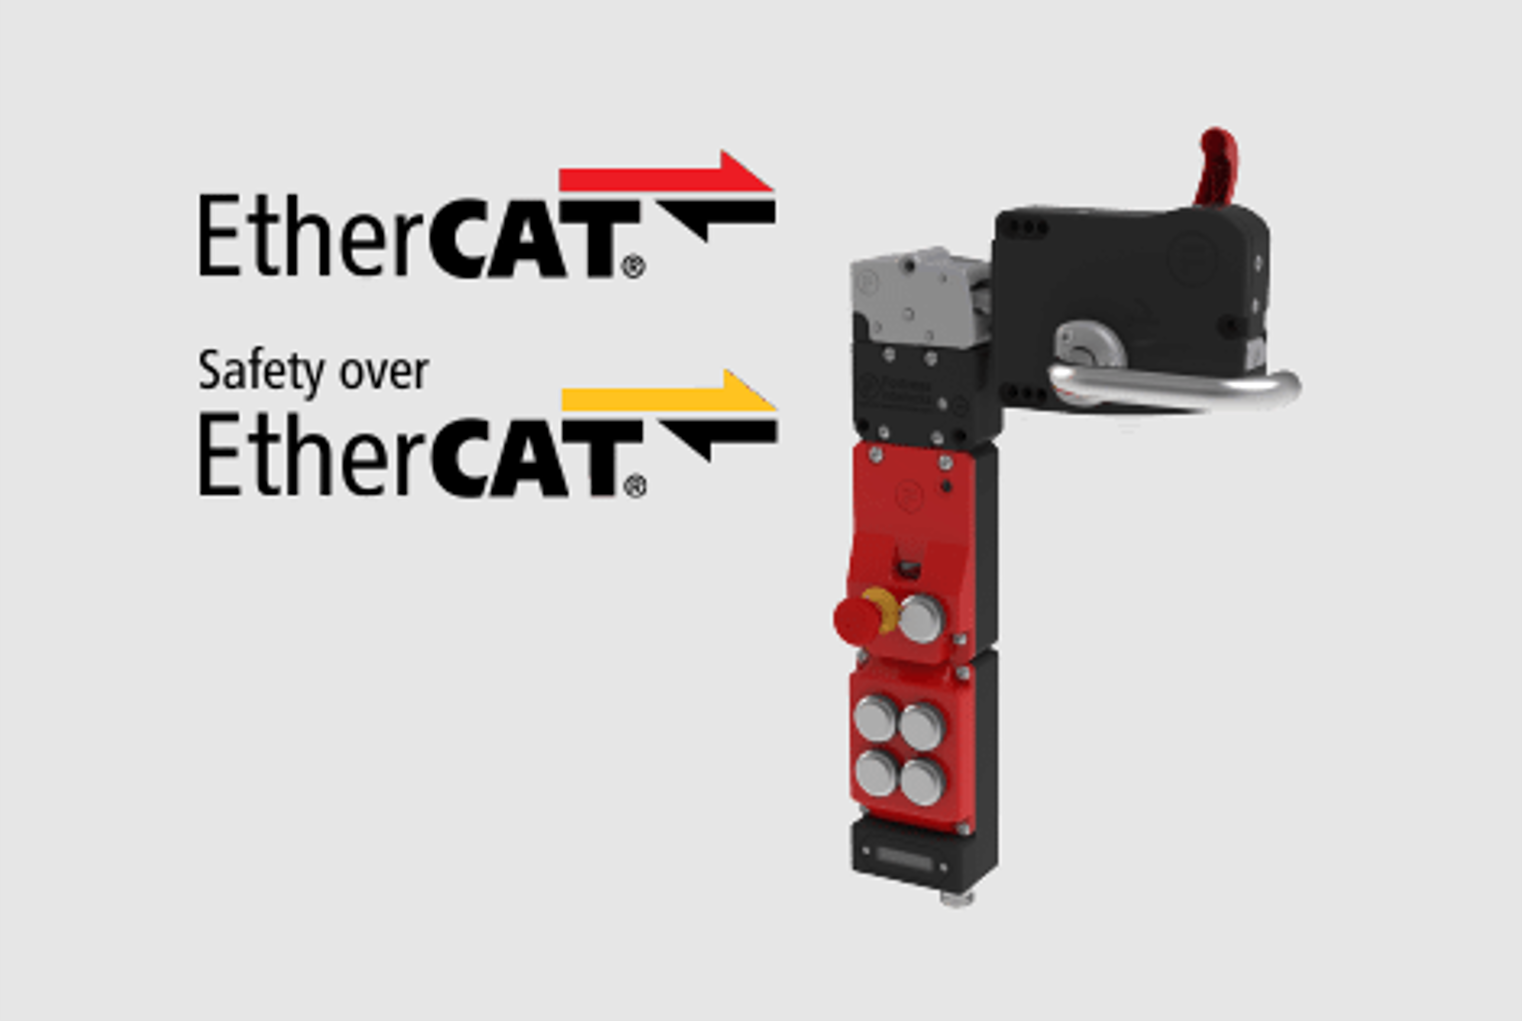 EtherCAT Now Available on proNet